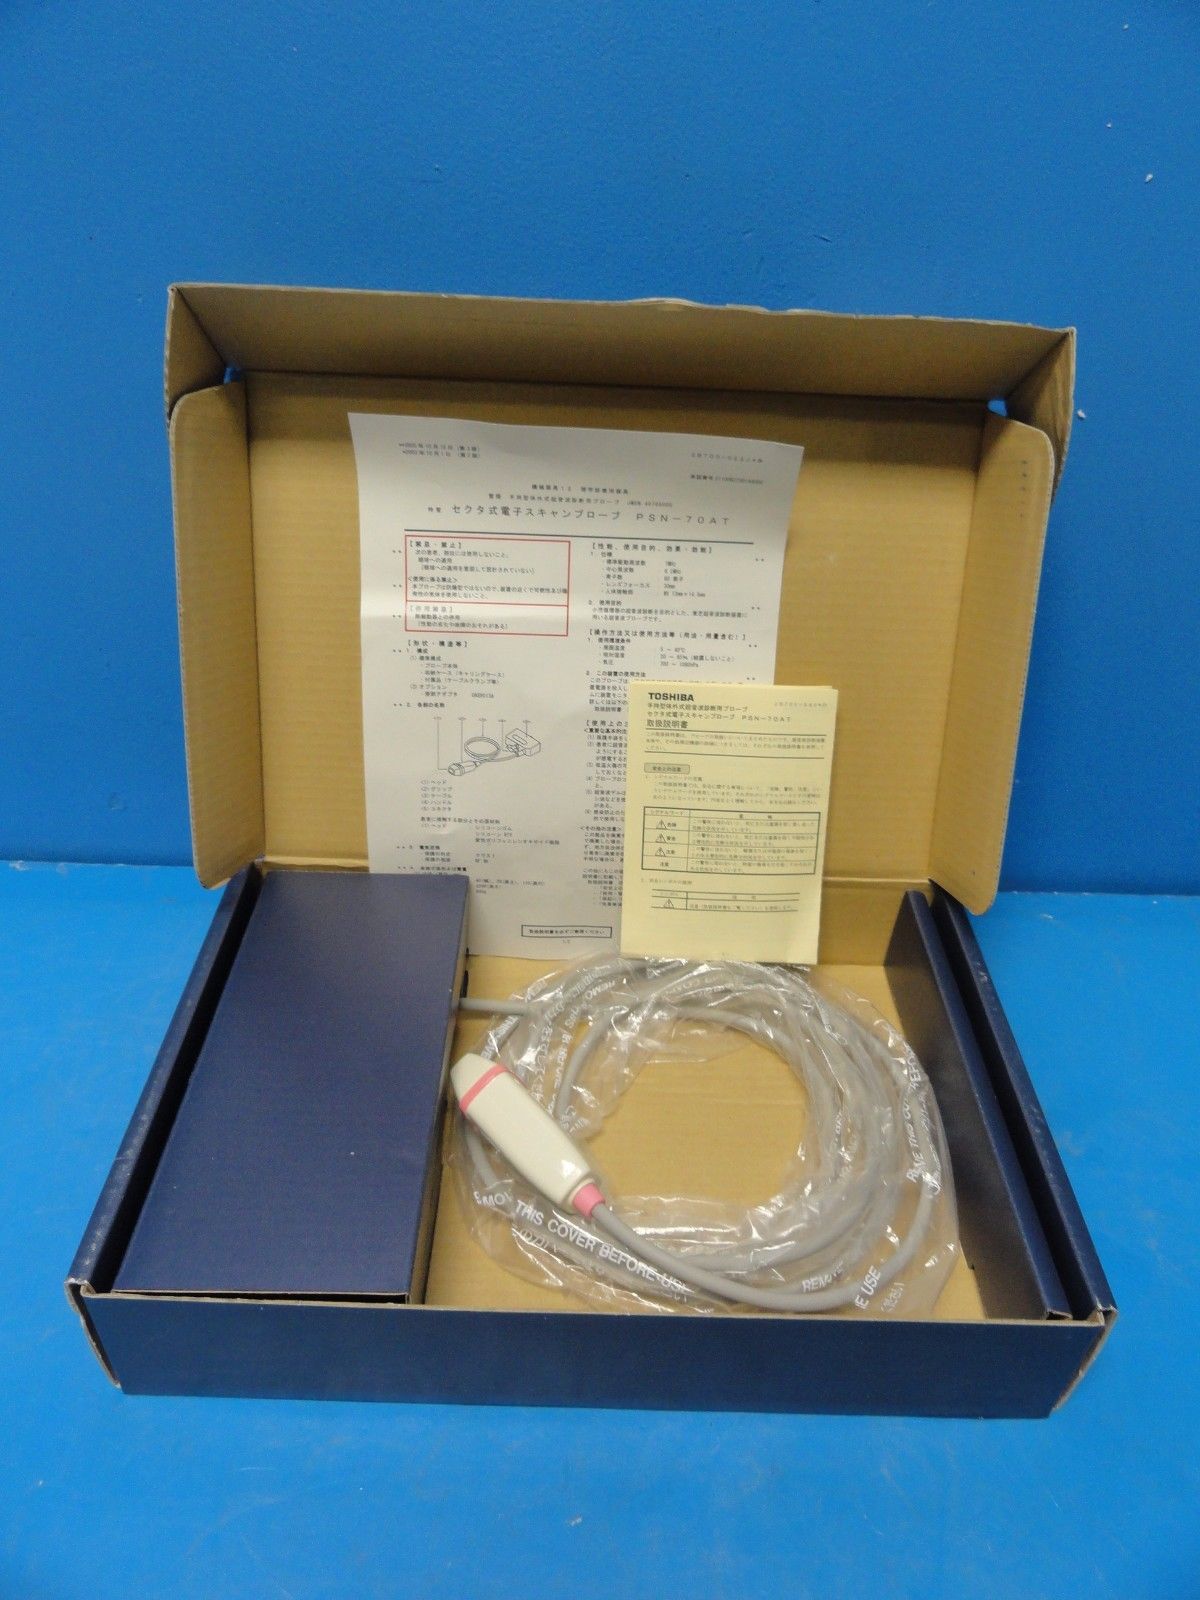 Toshiba PSH-70LT Phased Array Ultrasound Probe for Toshiba SSH-140A Series(9684) DIAGNOSTIC ULTRASOUND MACHINES FOR SALE